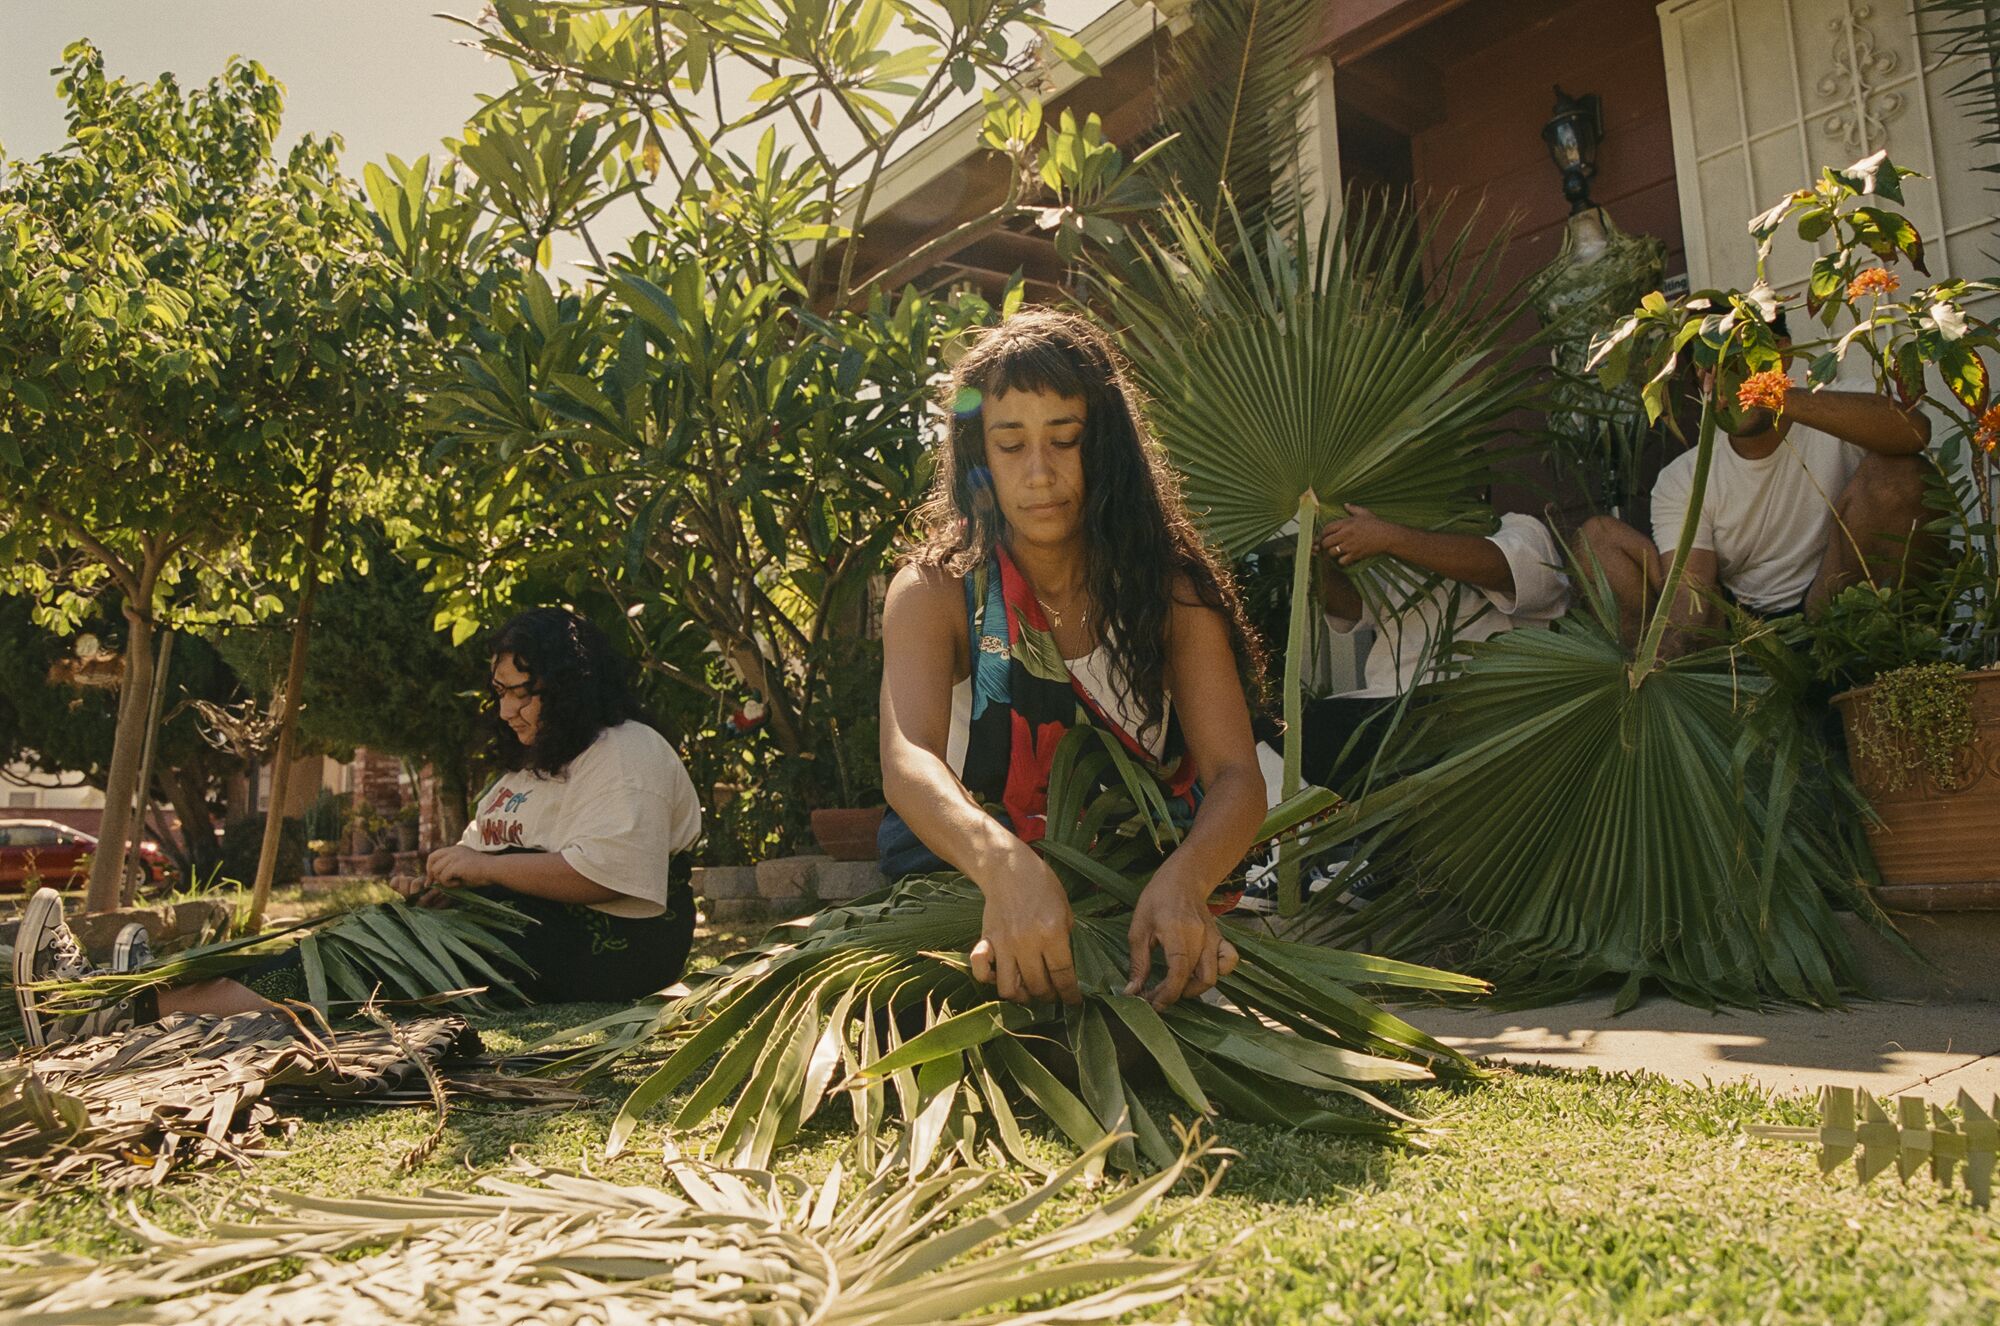 Several people sit on grass, cutting and weaving palms.